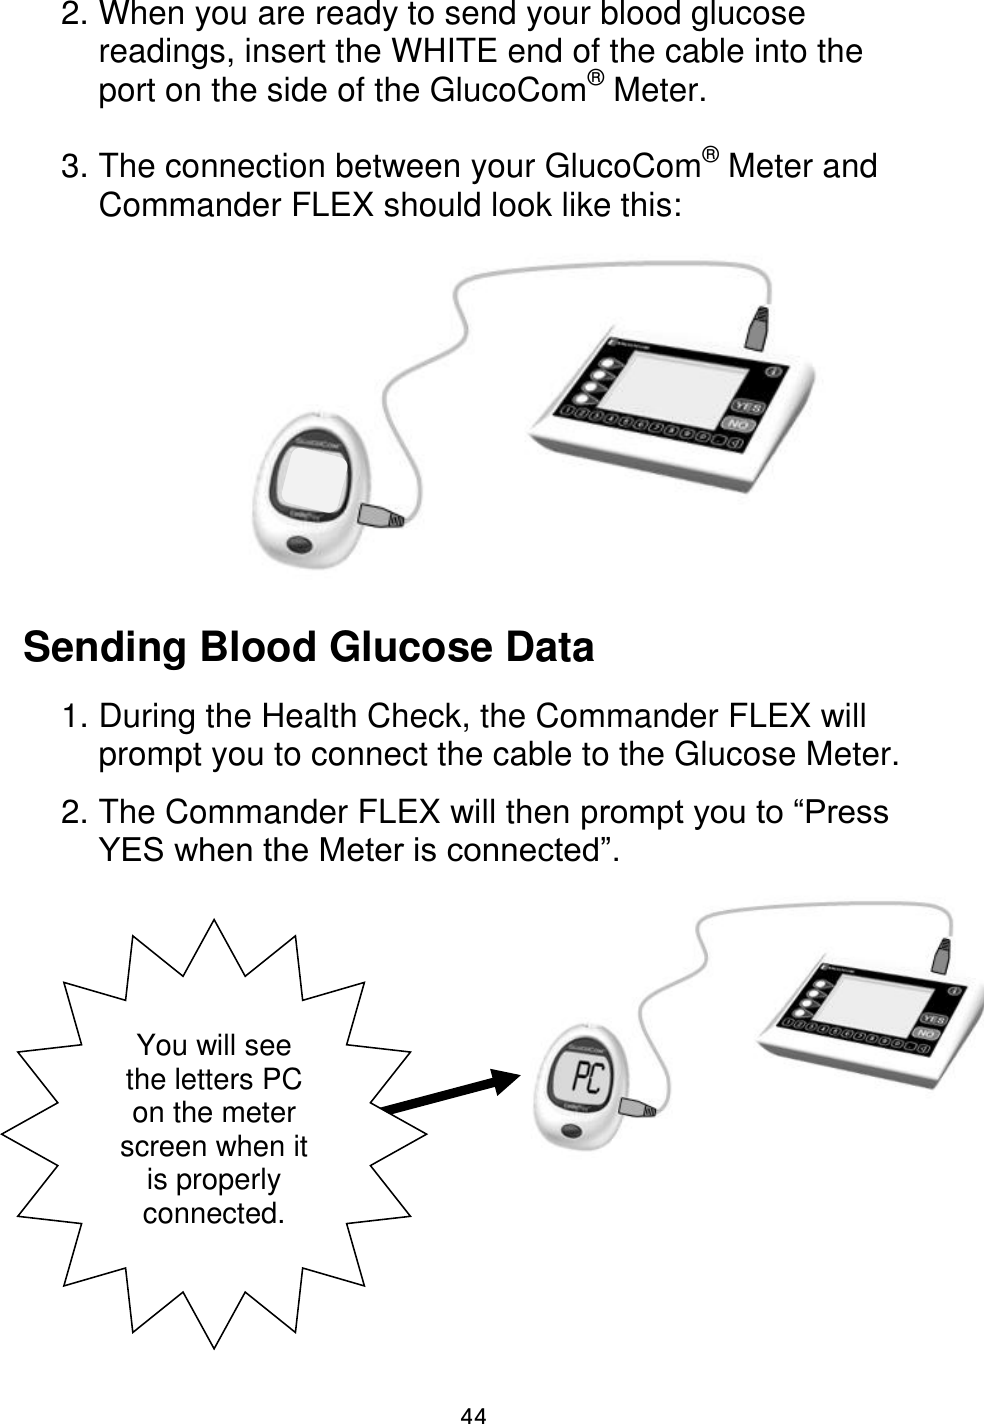                      44 2. When you are ready to send your blood glucose readings, insert the WHITE end of the cable into the port on the side of the GlucoCom® Meter.   3. The connection between your GlucoCom® Meter and Commander FLEX should look like this:         Sending Blood Glucose Data  1. During the Health Check, the Commander FLEX will prompt you to connect the cable to the Glucose Meter.  2. The Commander FLEX will then prompt you to “Press YES when the Meter is connected”.            You will see the letters PC on the meter screen when it is properly connected.  